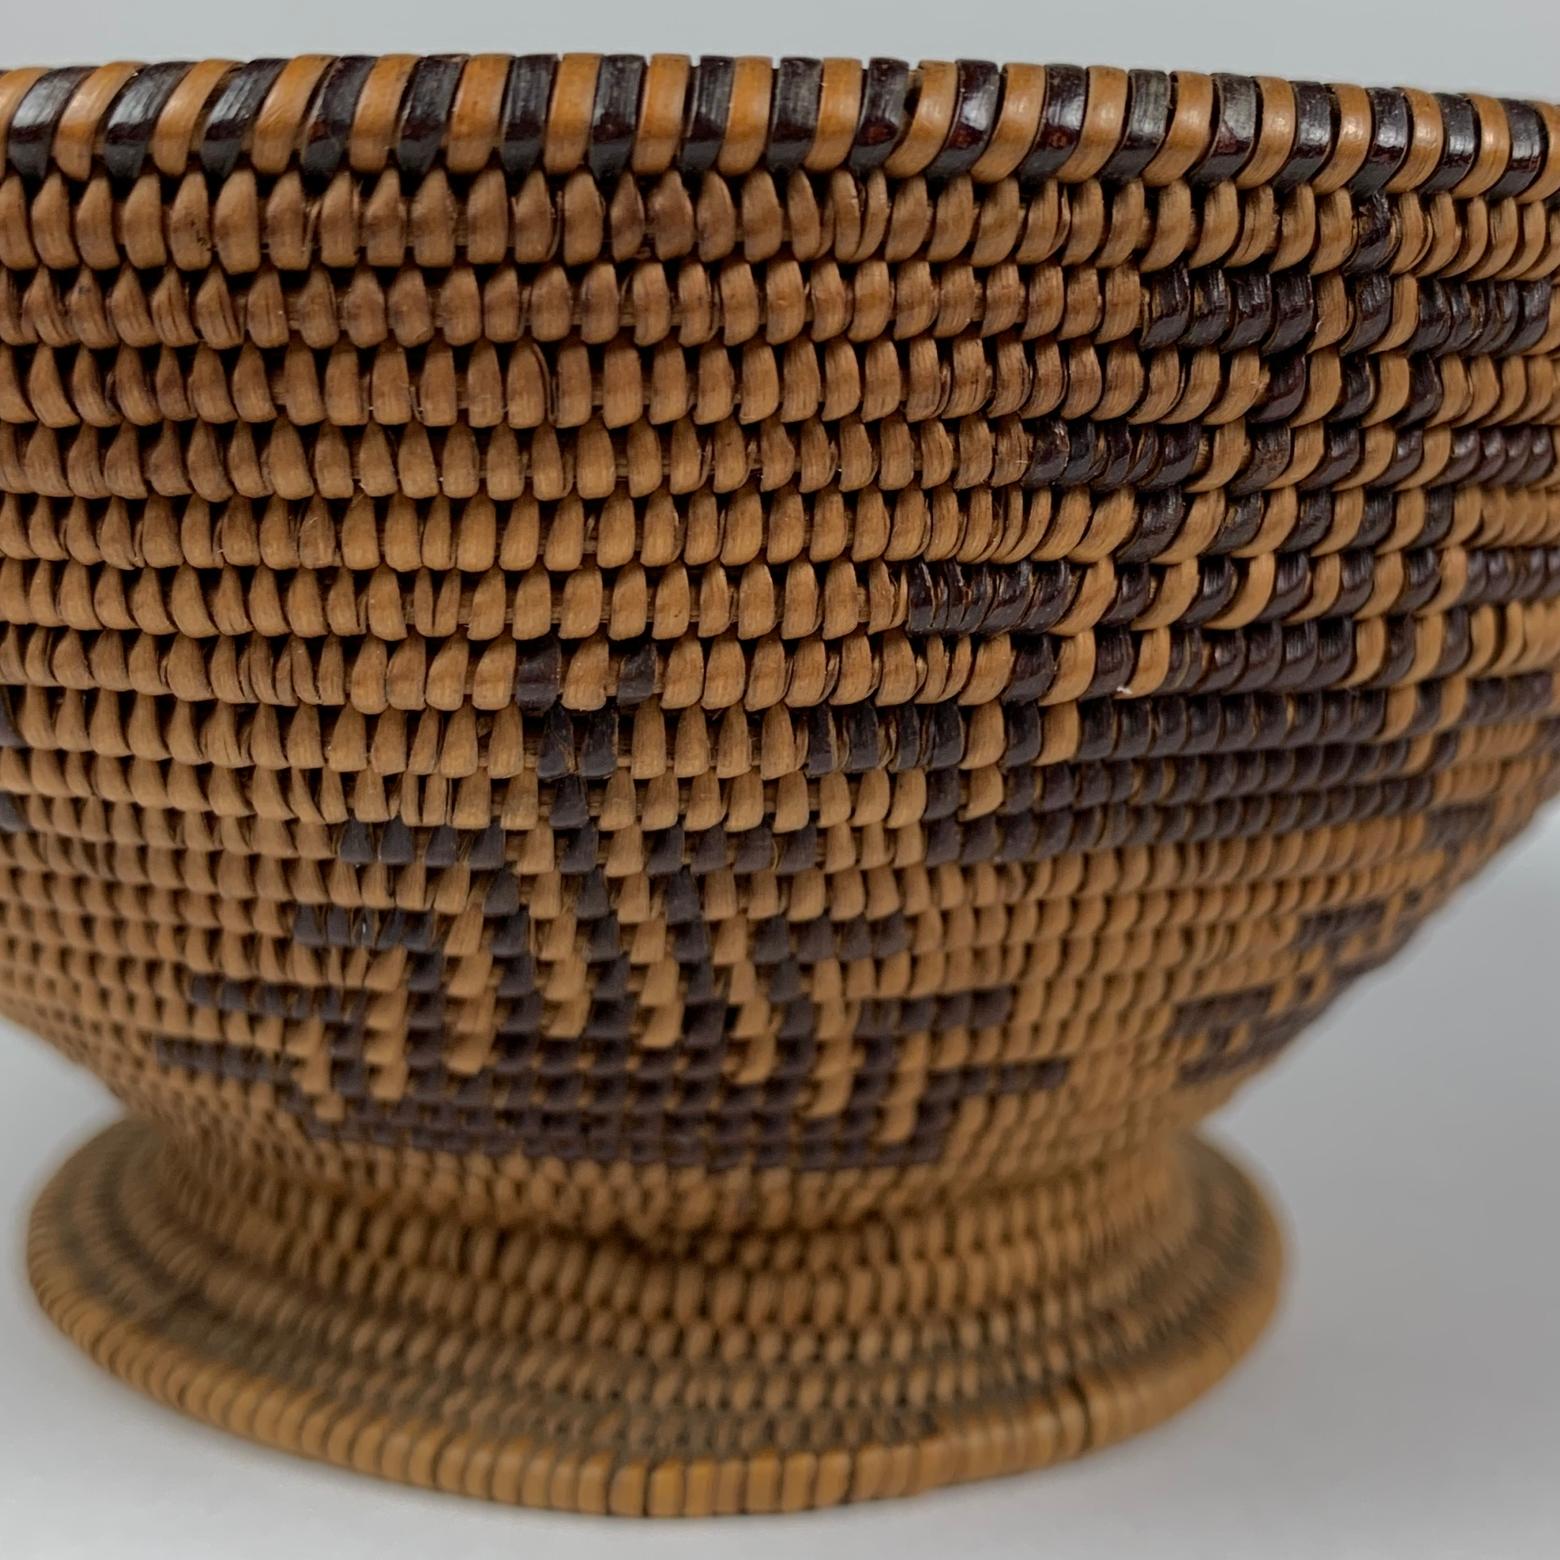 Native American woven bowl form basket
Size: 2 1/2 inches (height) 
5 inches (diameter)

AE7191.